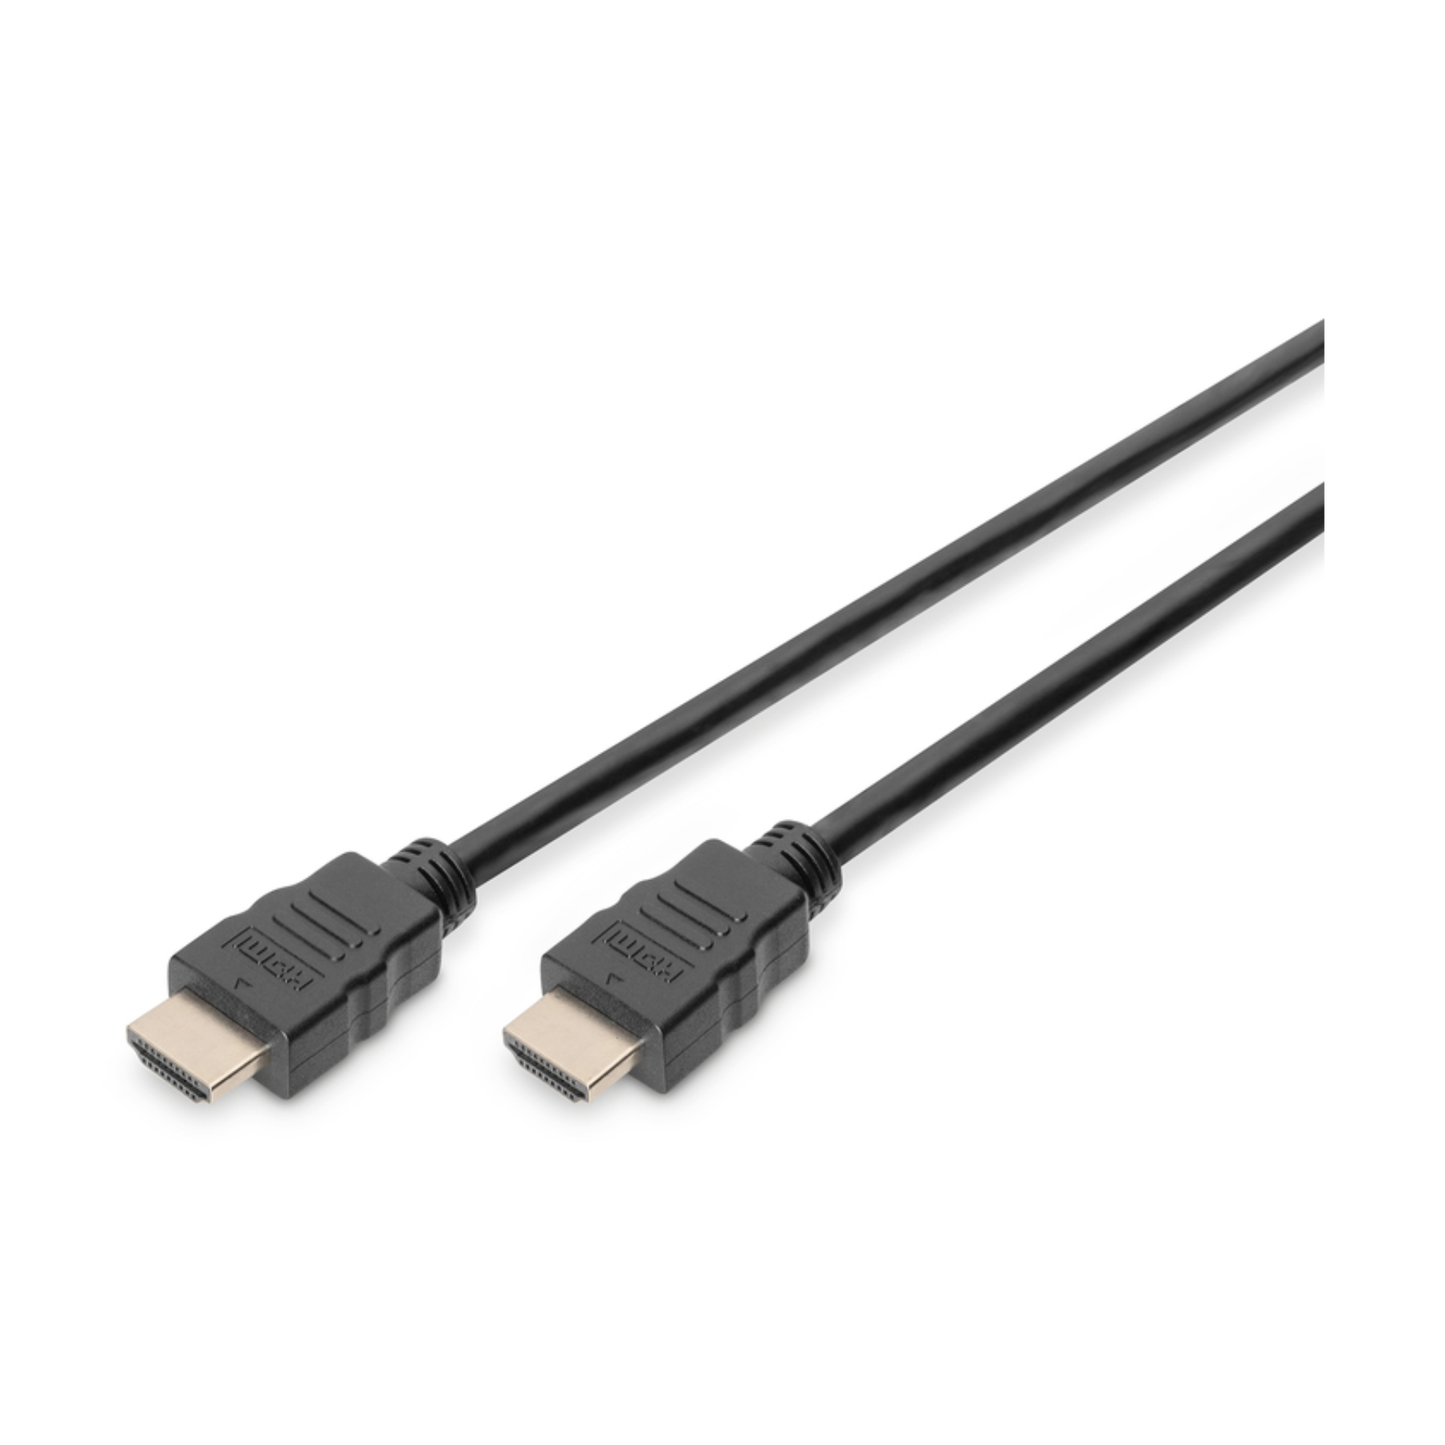 Buy Digitus 10m HDMI High Speed Cable | Topic Store